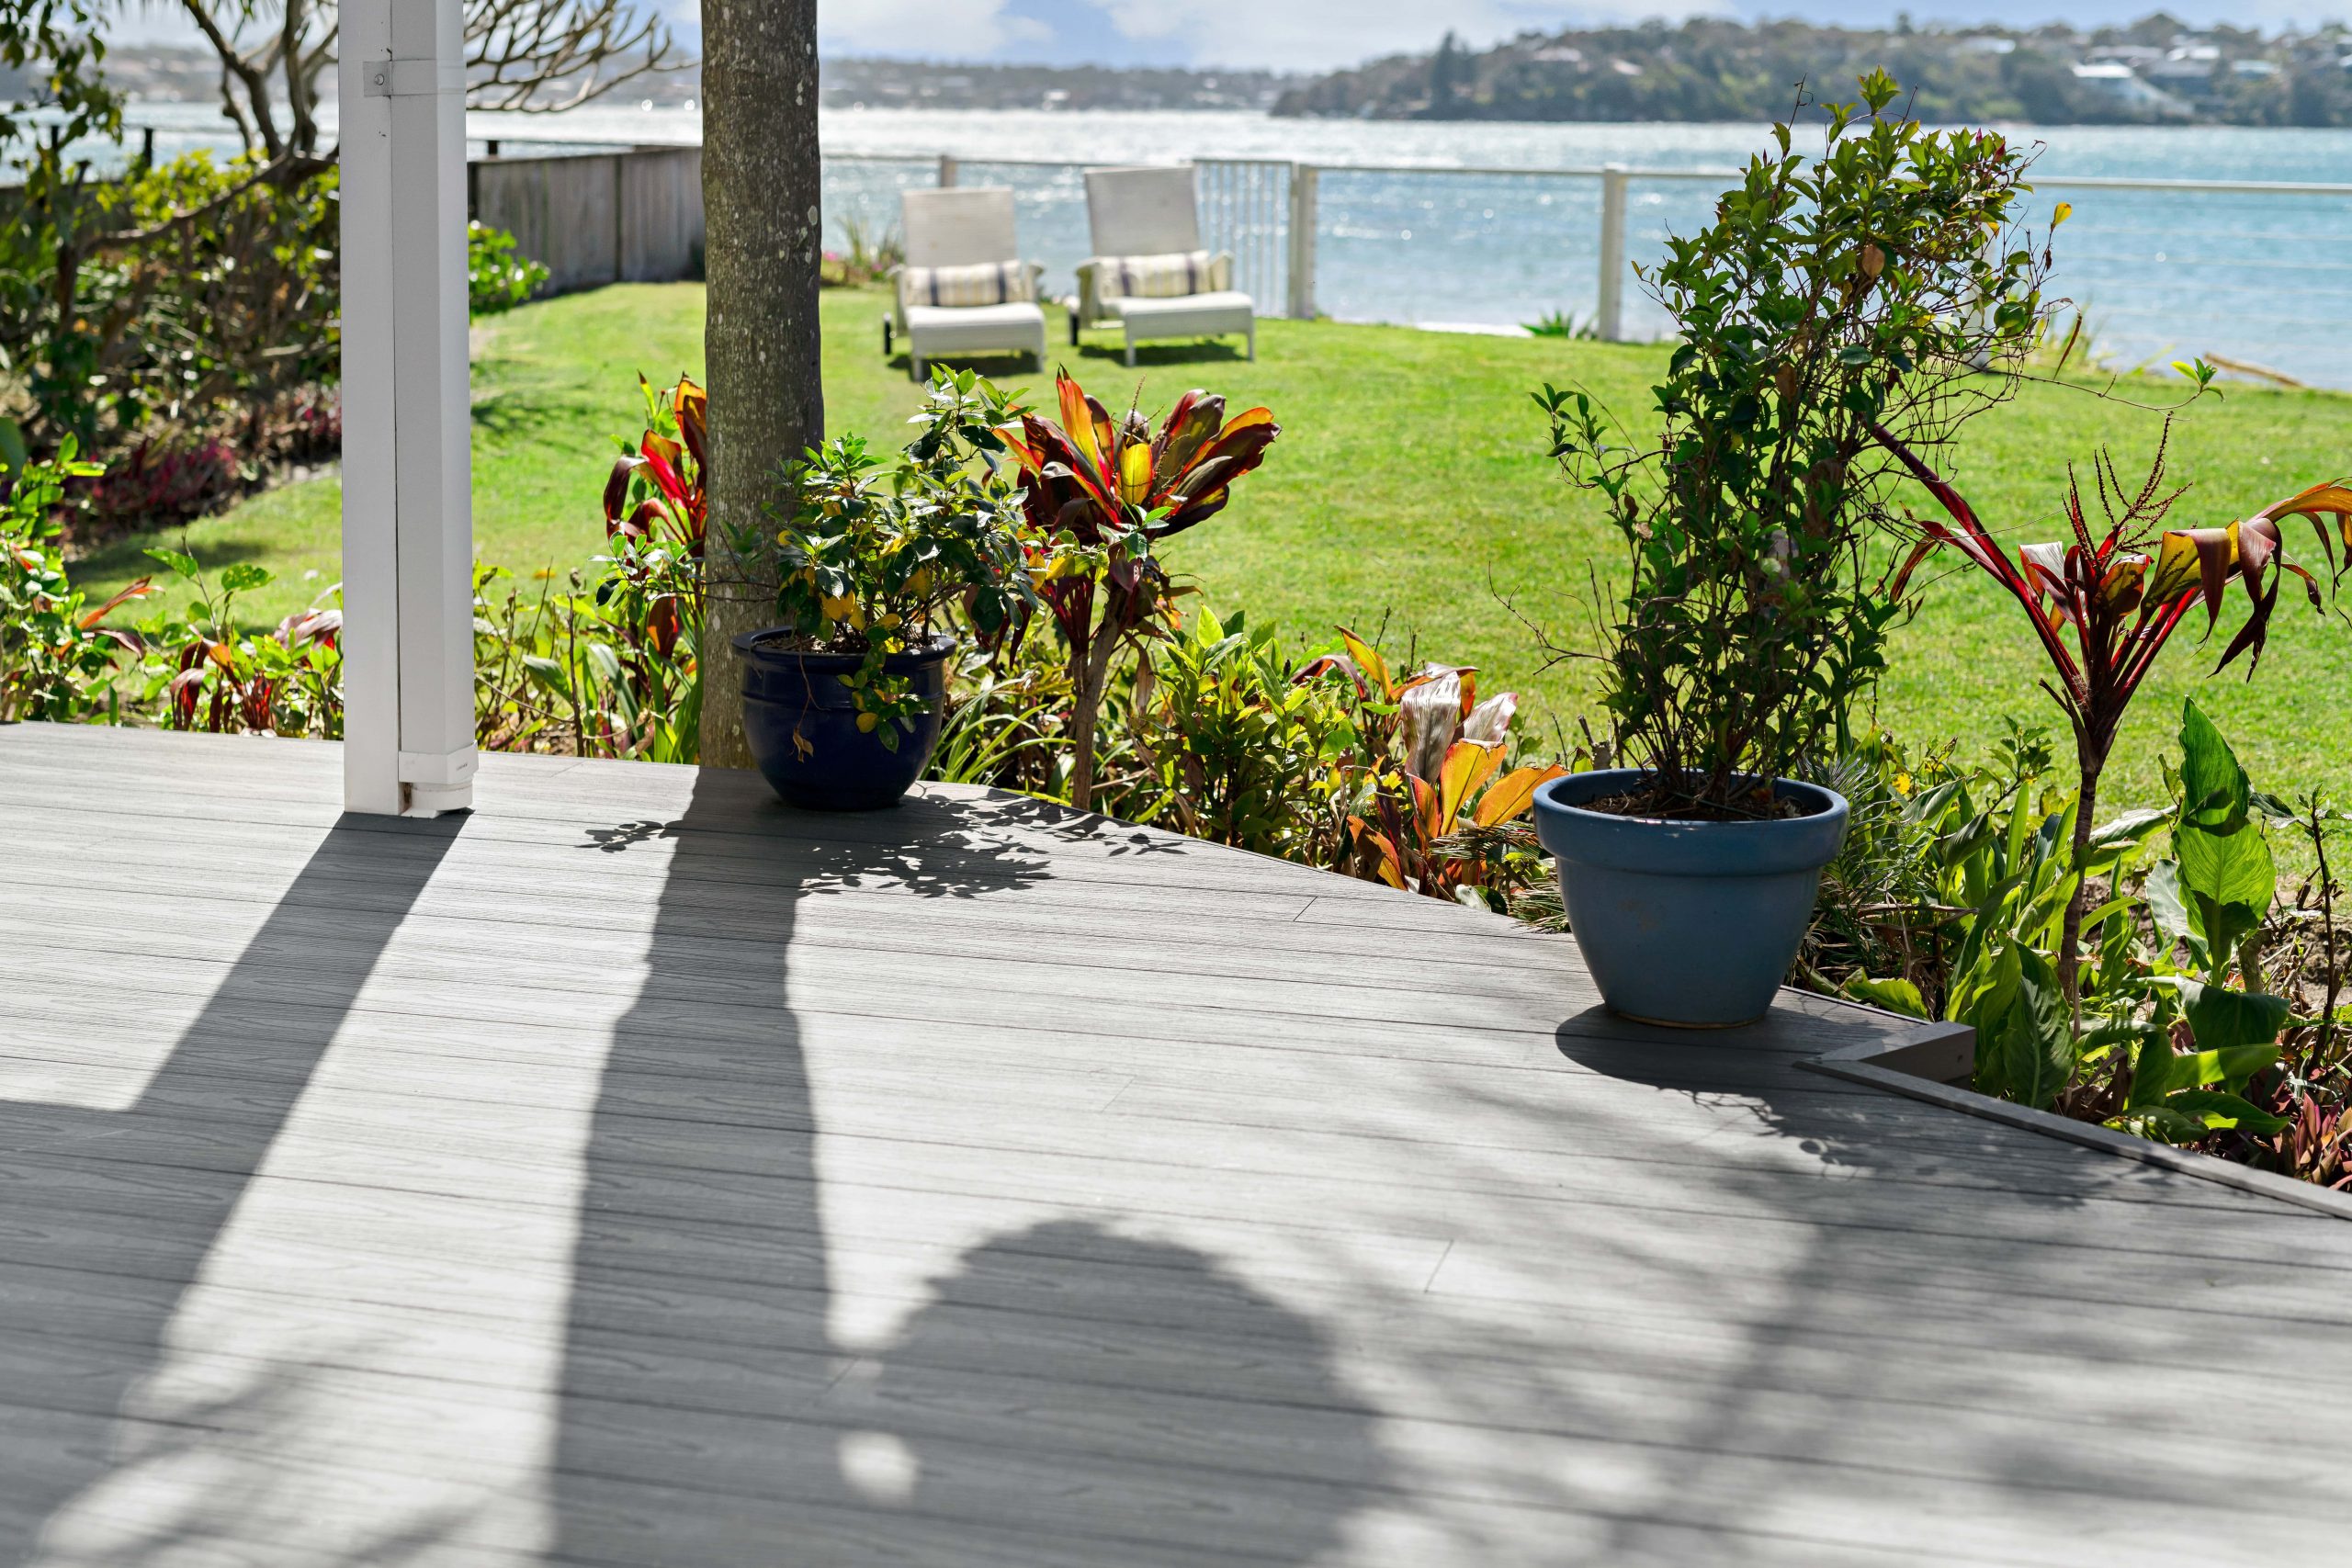 Shadows across gray composite decking boards overlooking a lawn and ocean